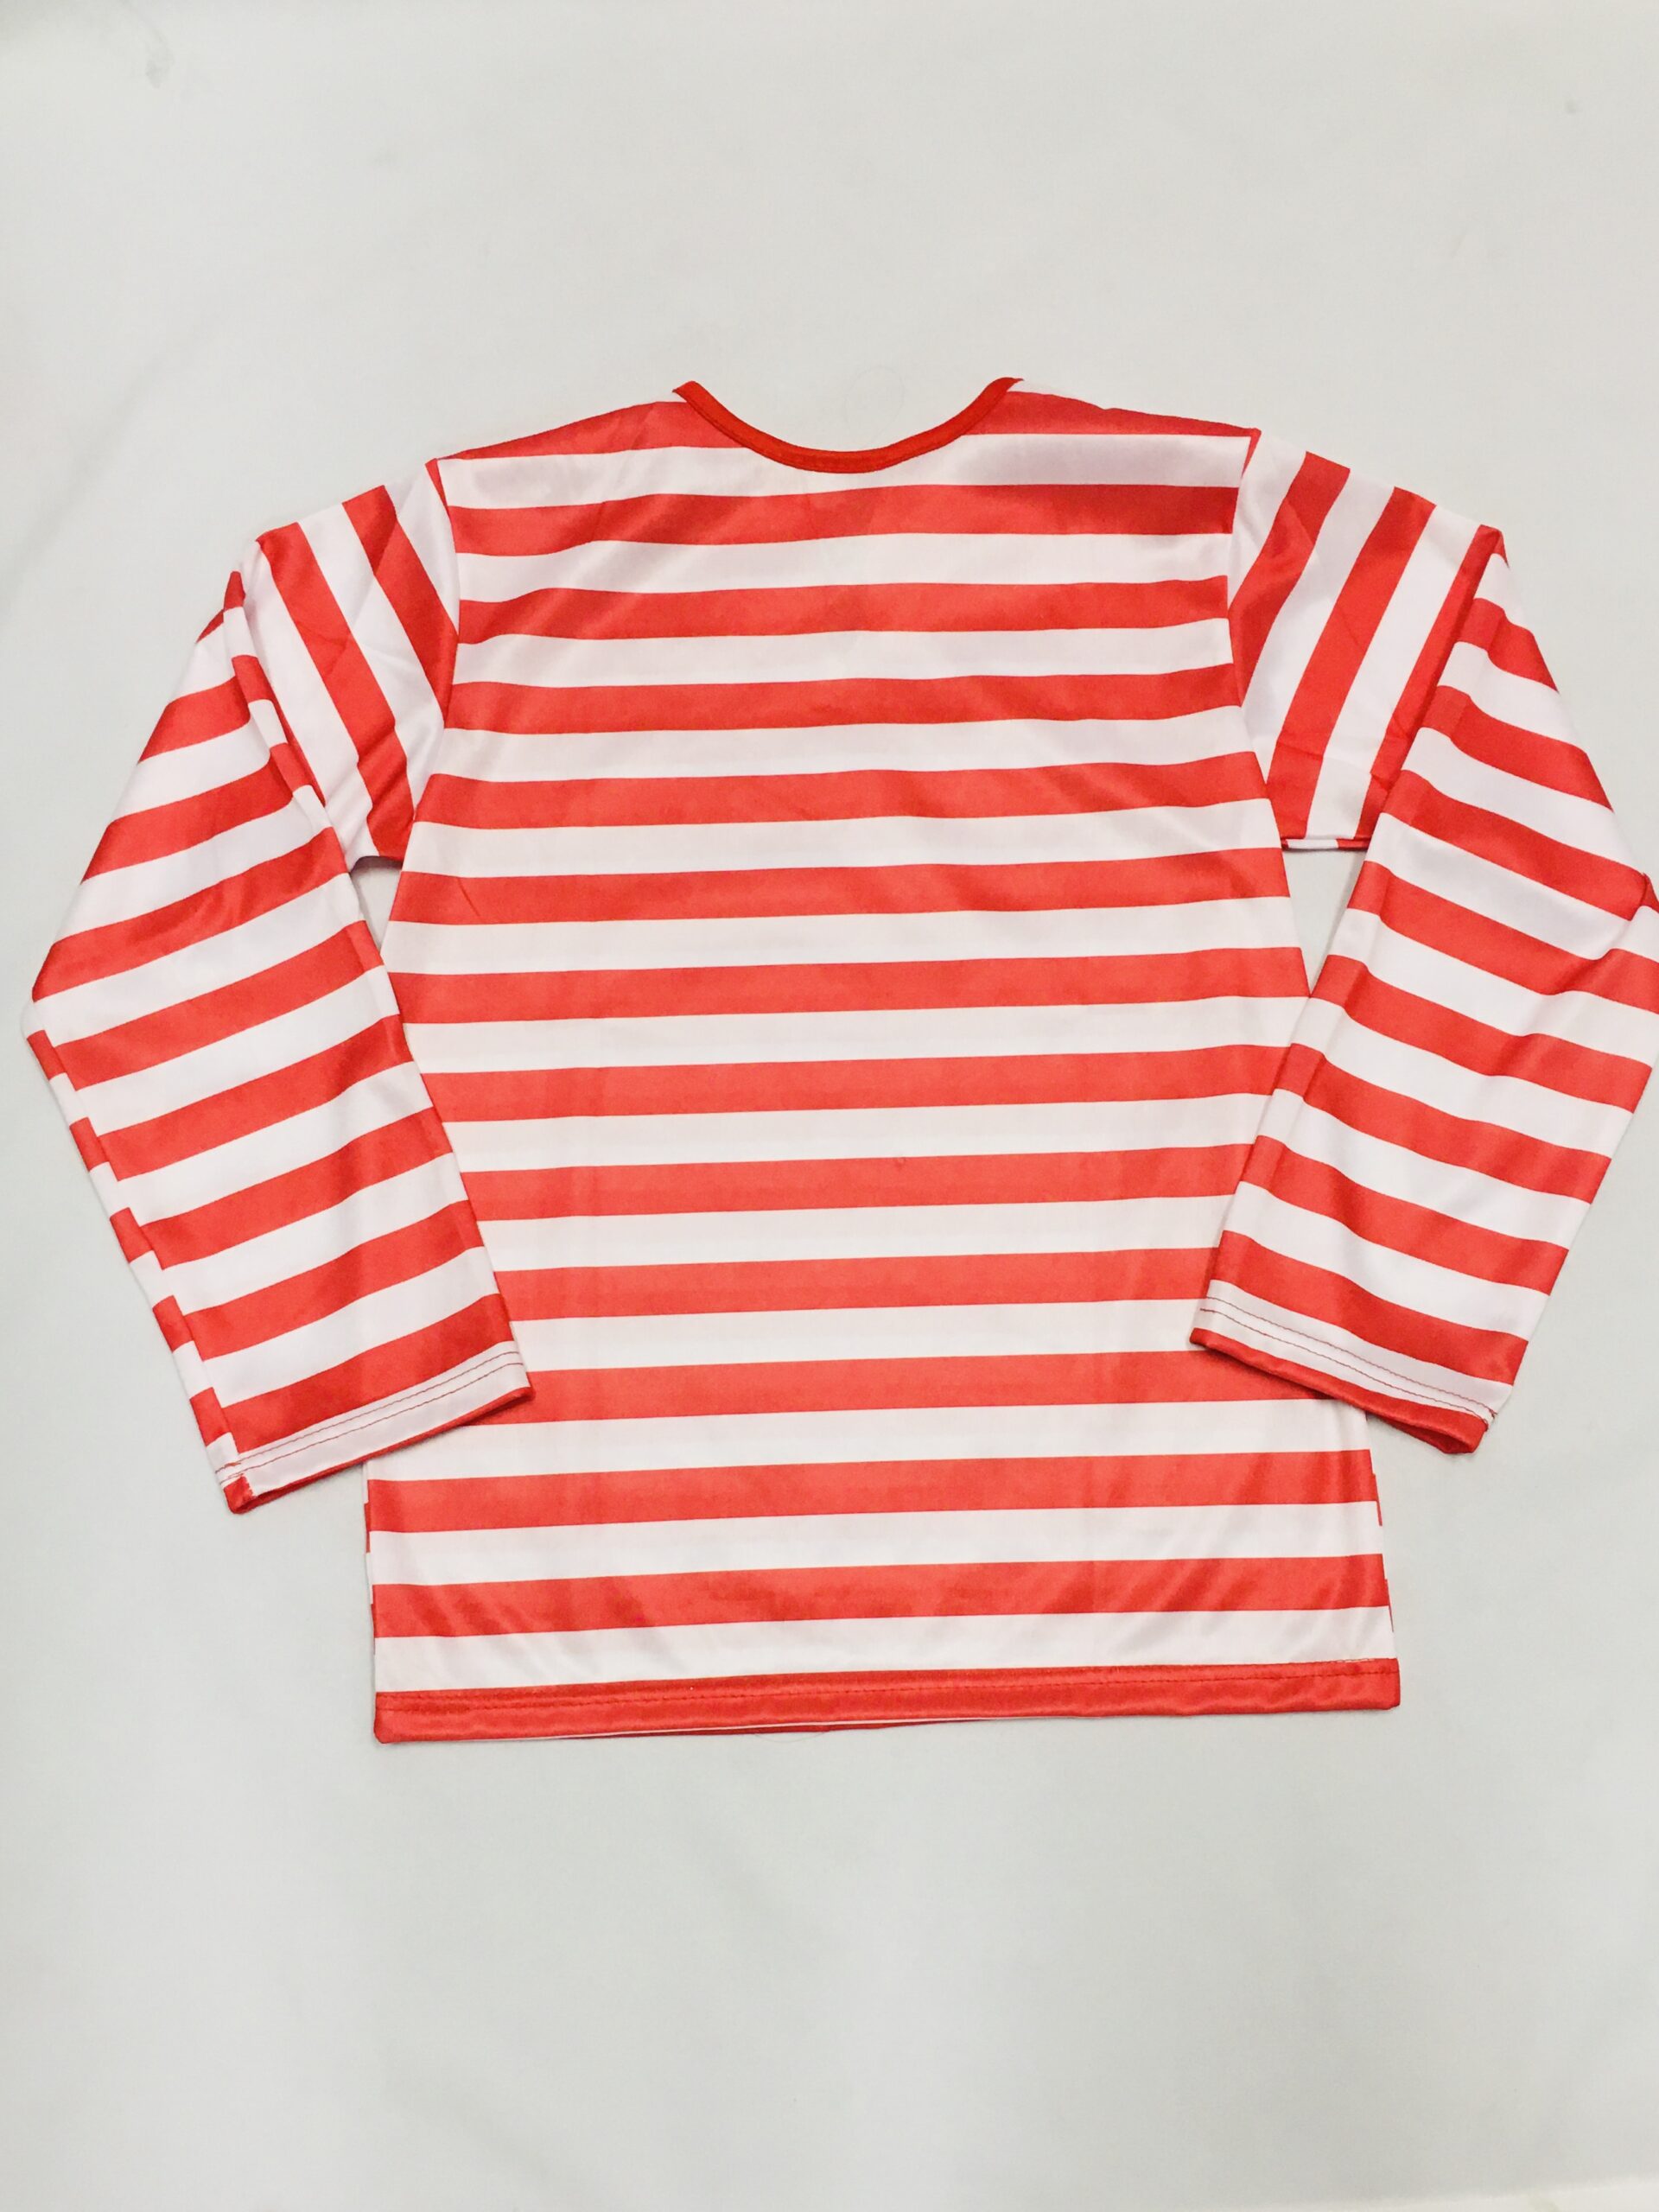 Featured image for “Red & White Striped Top (Long Sleeve), Child”